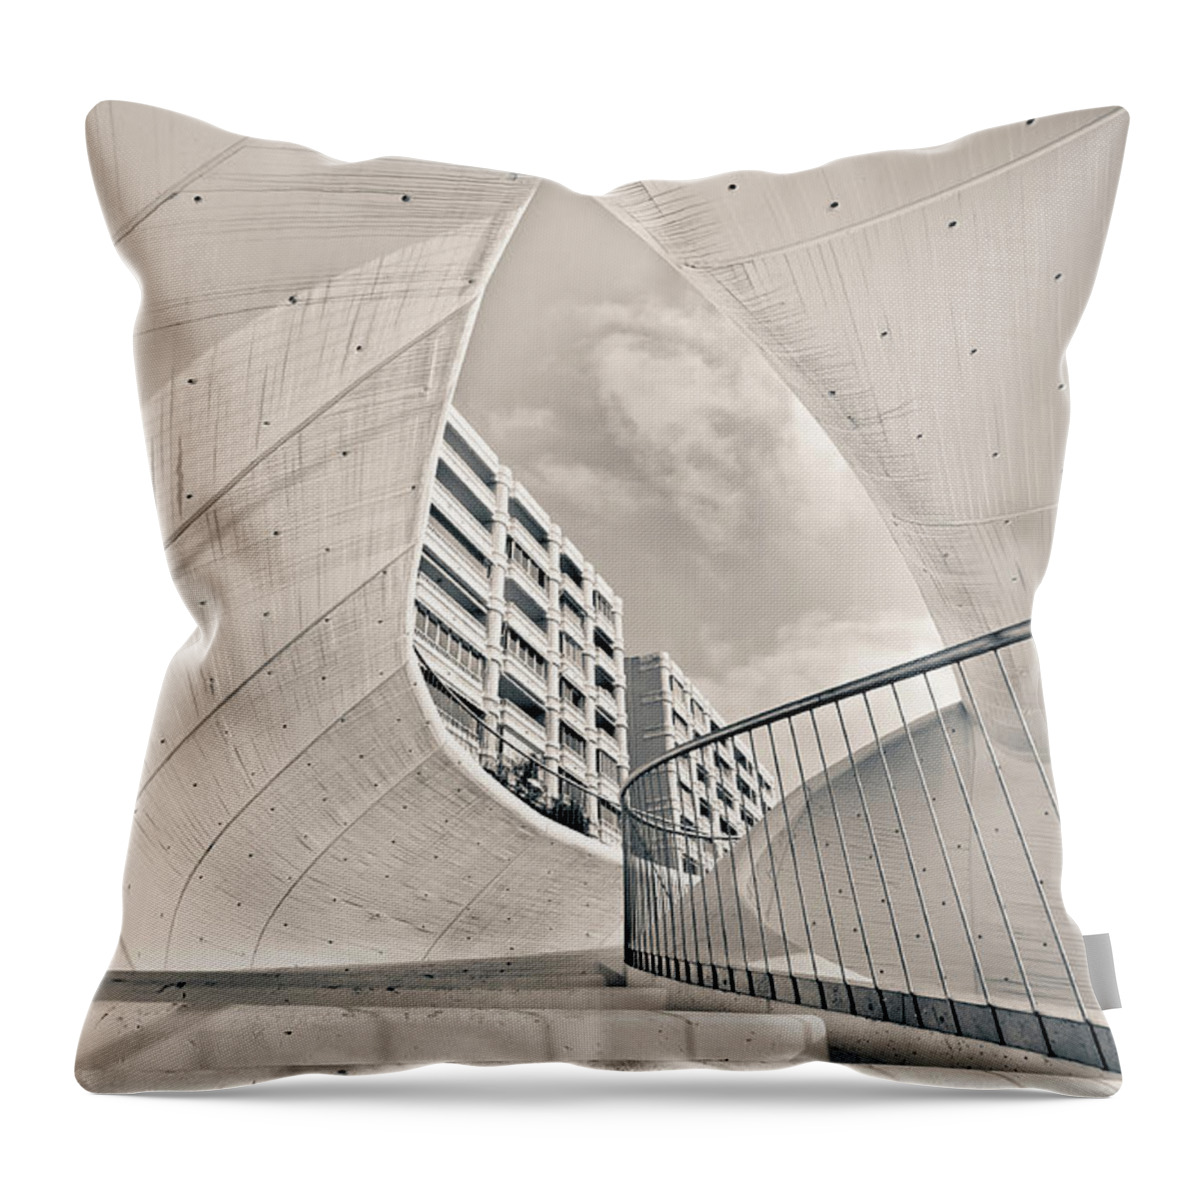 Tranquility Throw Pillow featuring the photograph Tunnel Stairways,benidorm by Ramonescu Photography